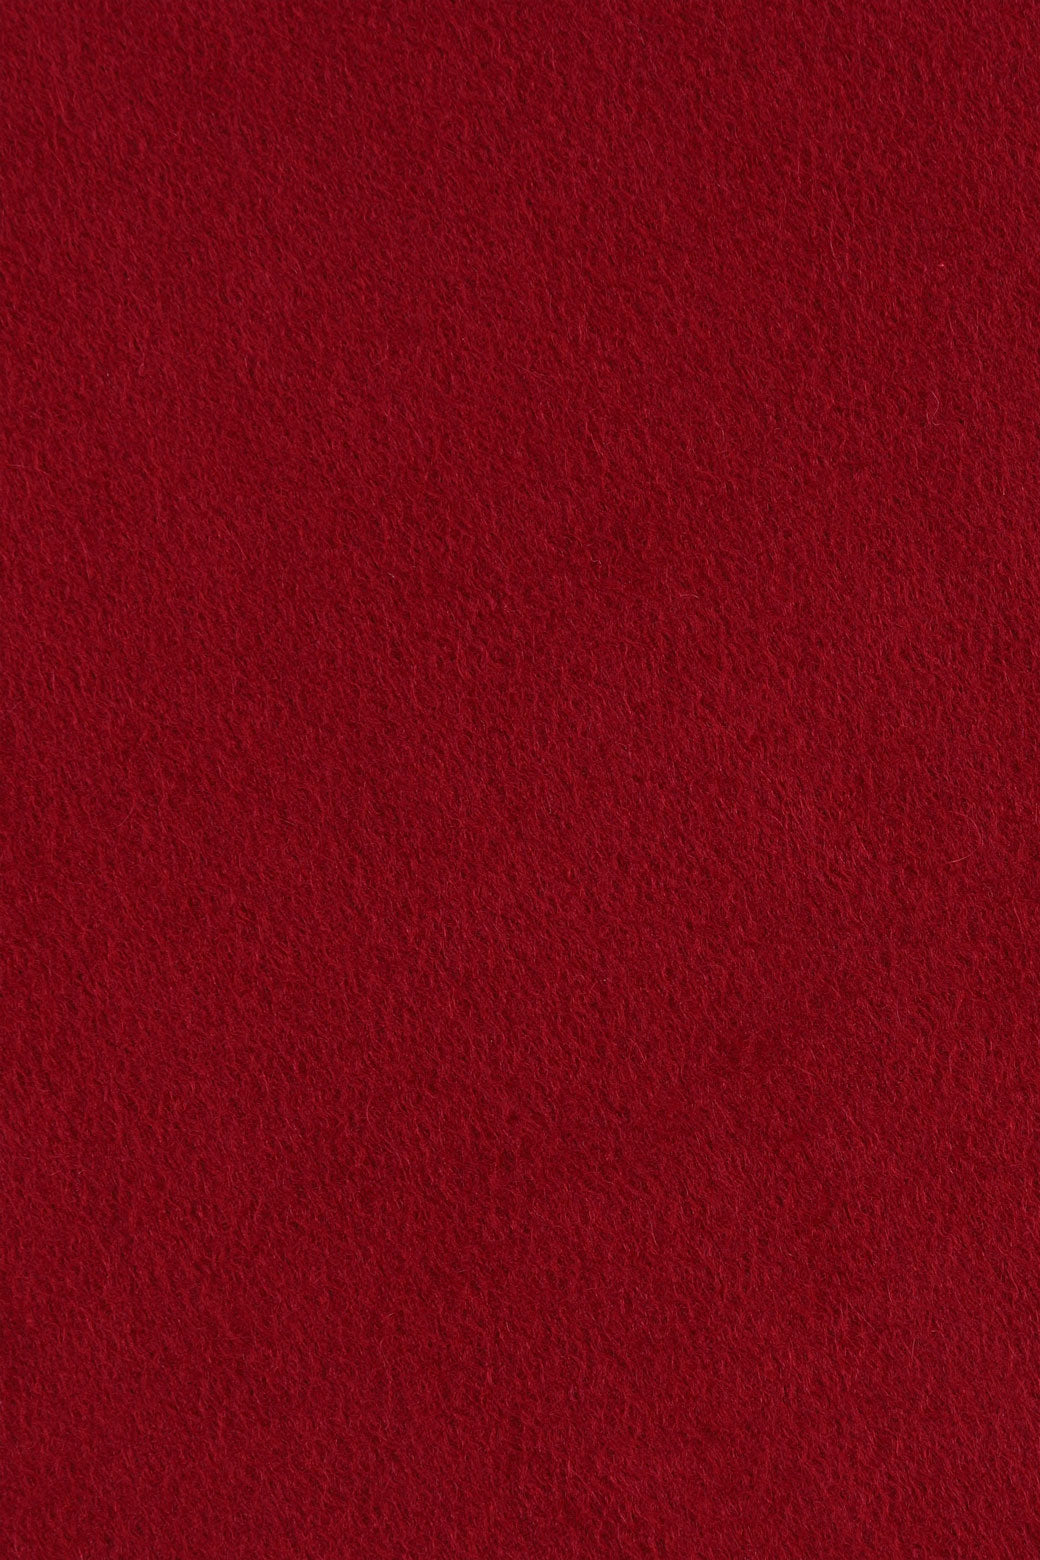 Close range view of red-maroon cashmere scarf from Soho Scarves, showing individual fibres and texture of soft material.